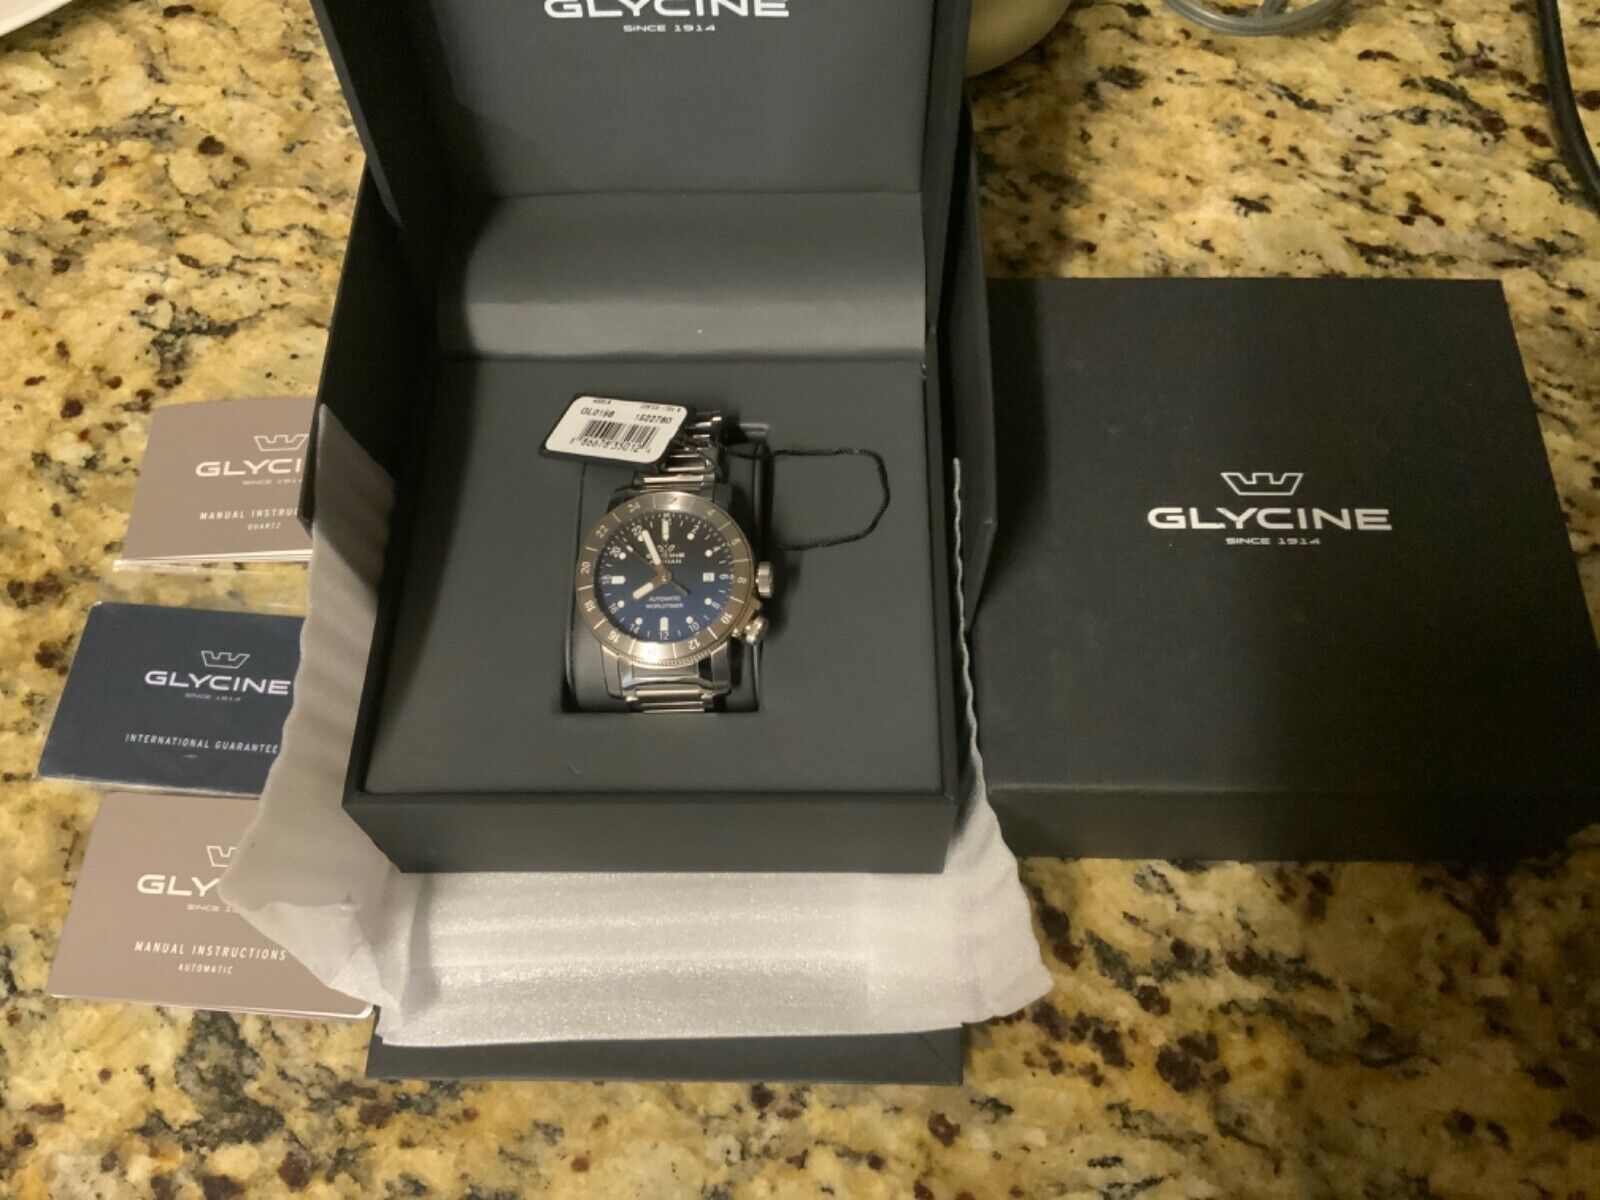 Glycine Airman GL0156 Stainless Steel Automatic Men’s watch ($2850 MSRP) - $439.99